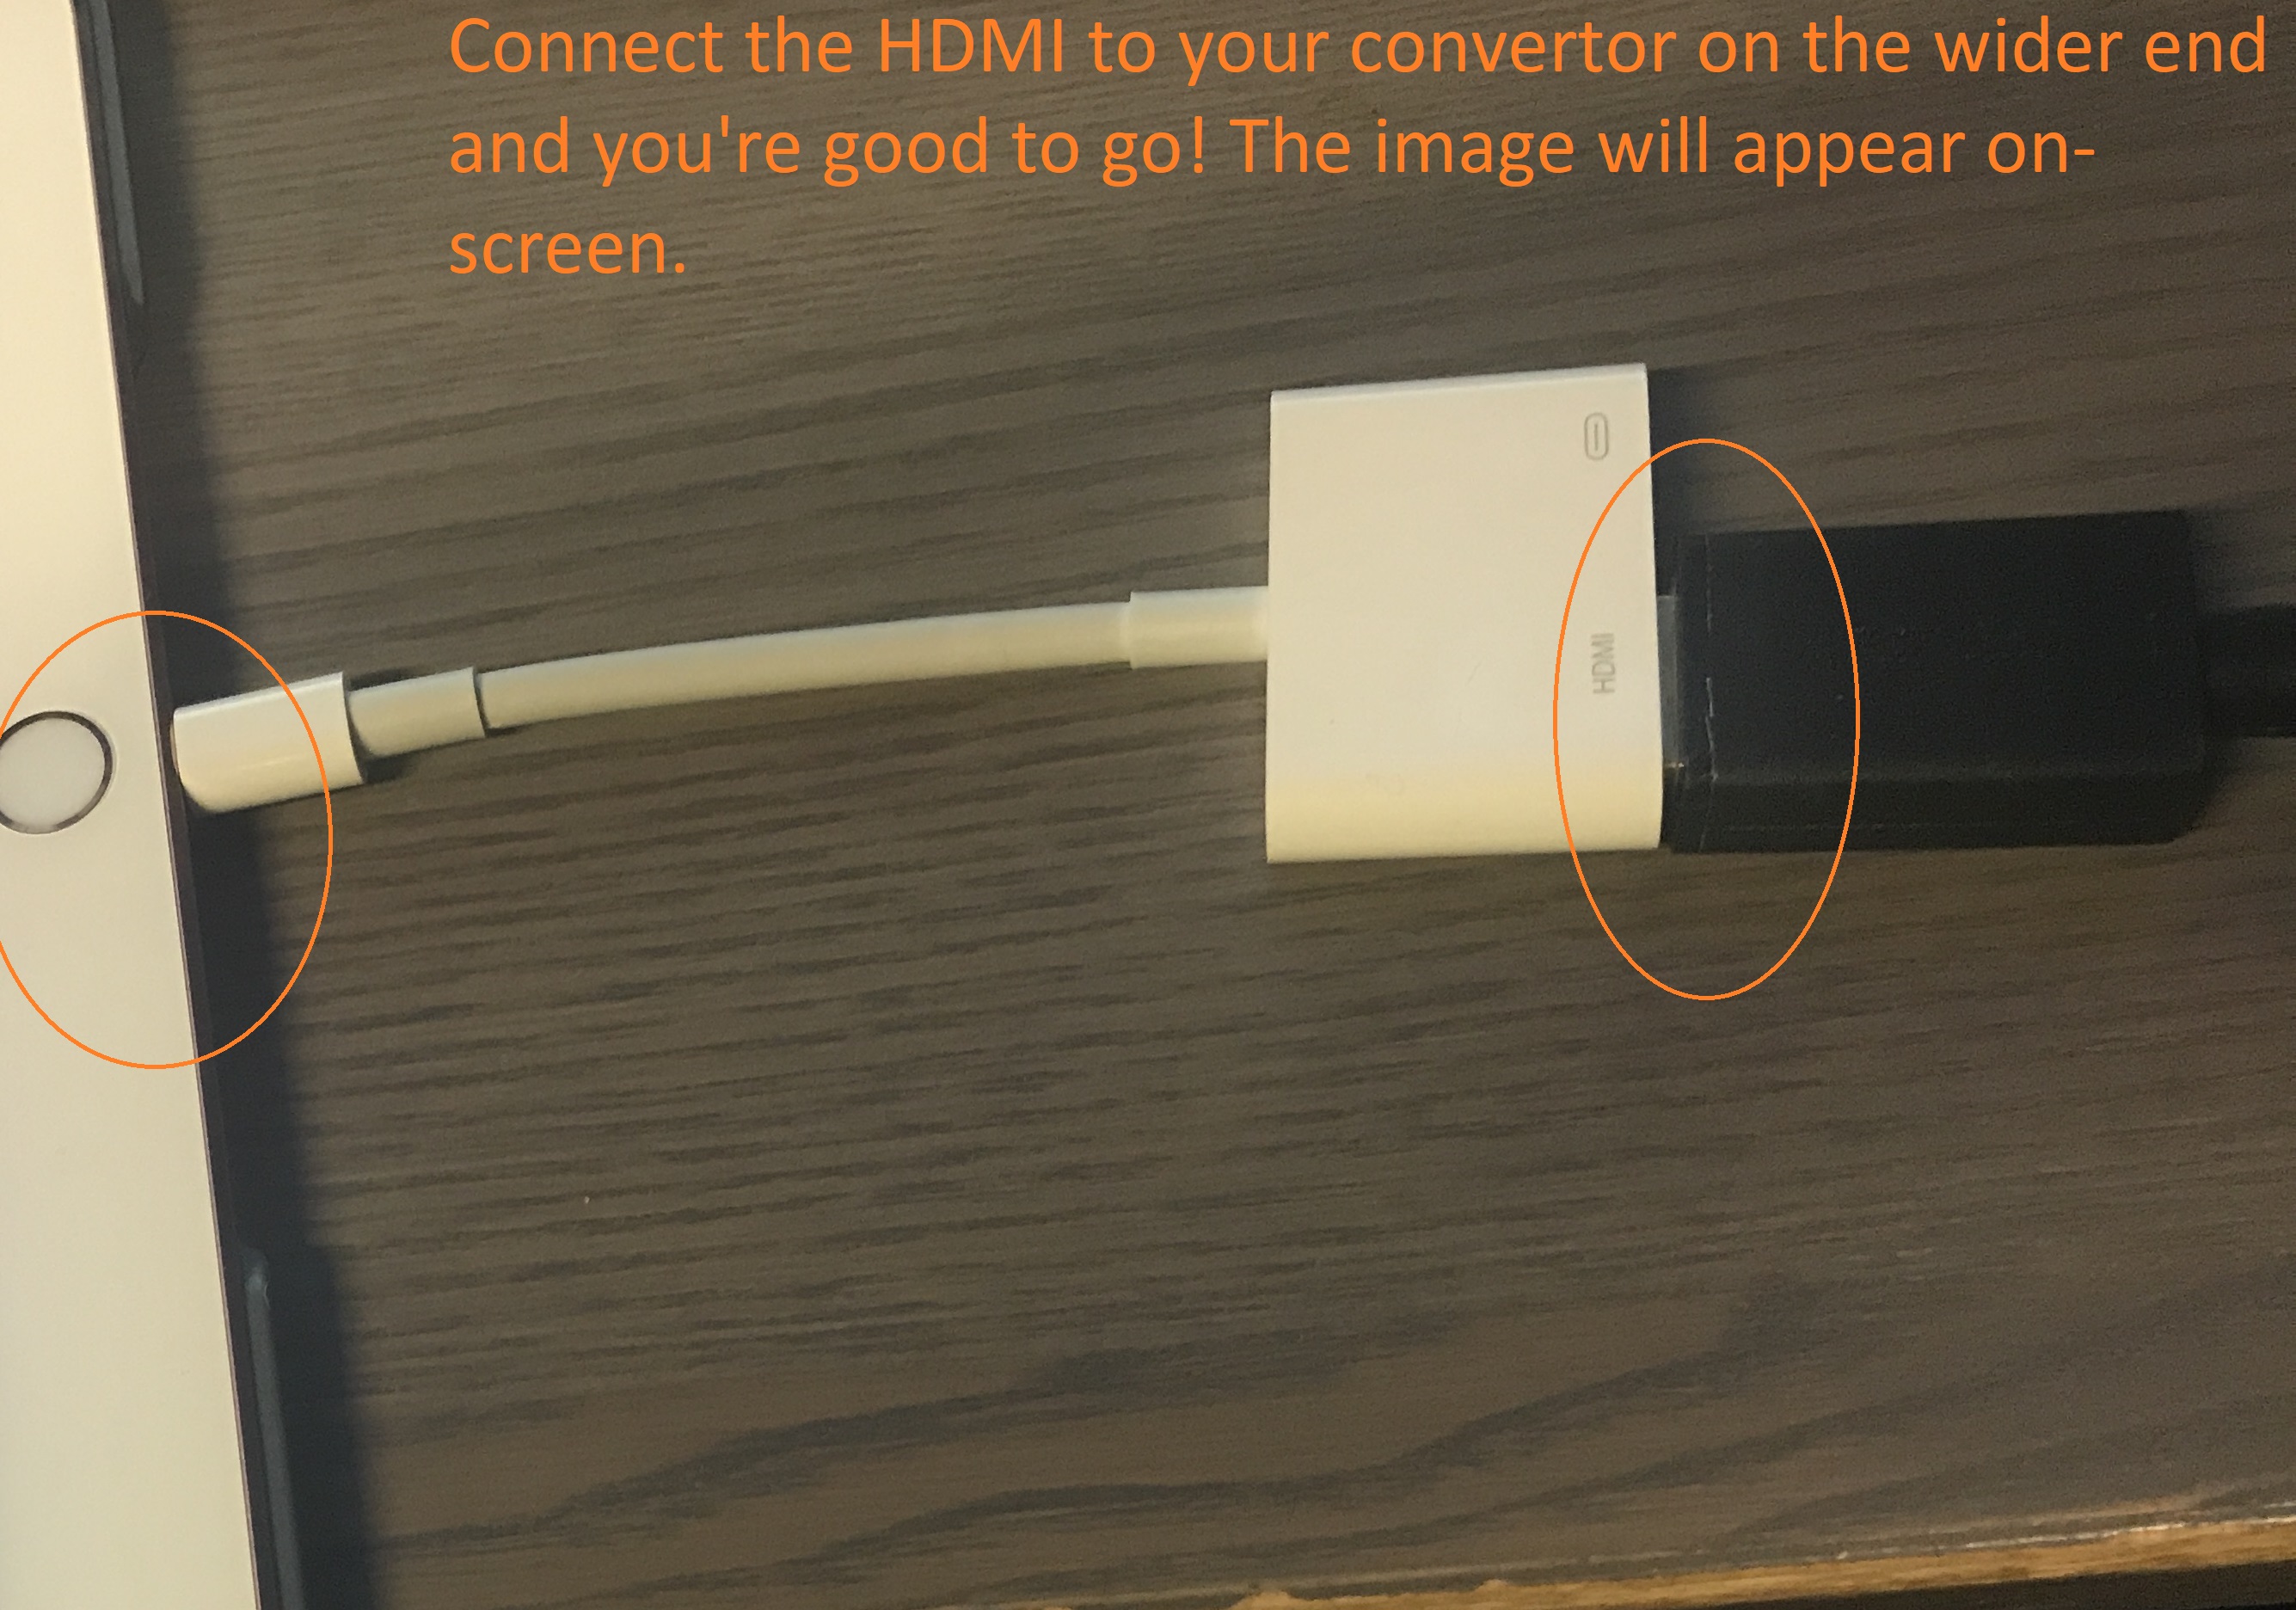 HDMI cable from a TV plugged into left-hand port on the large end of the adapter.